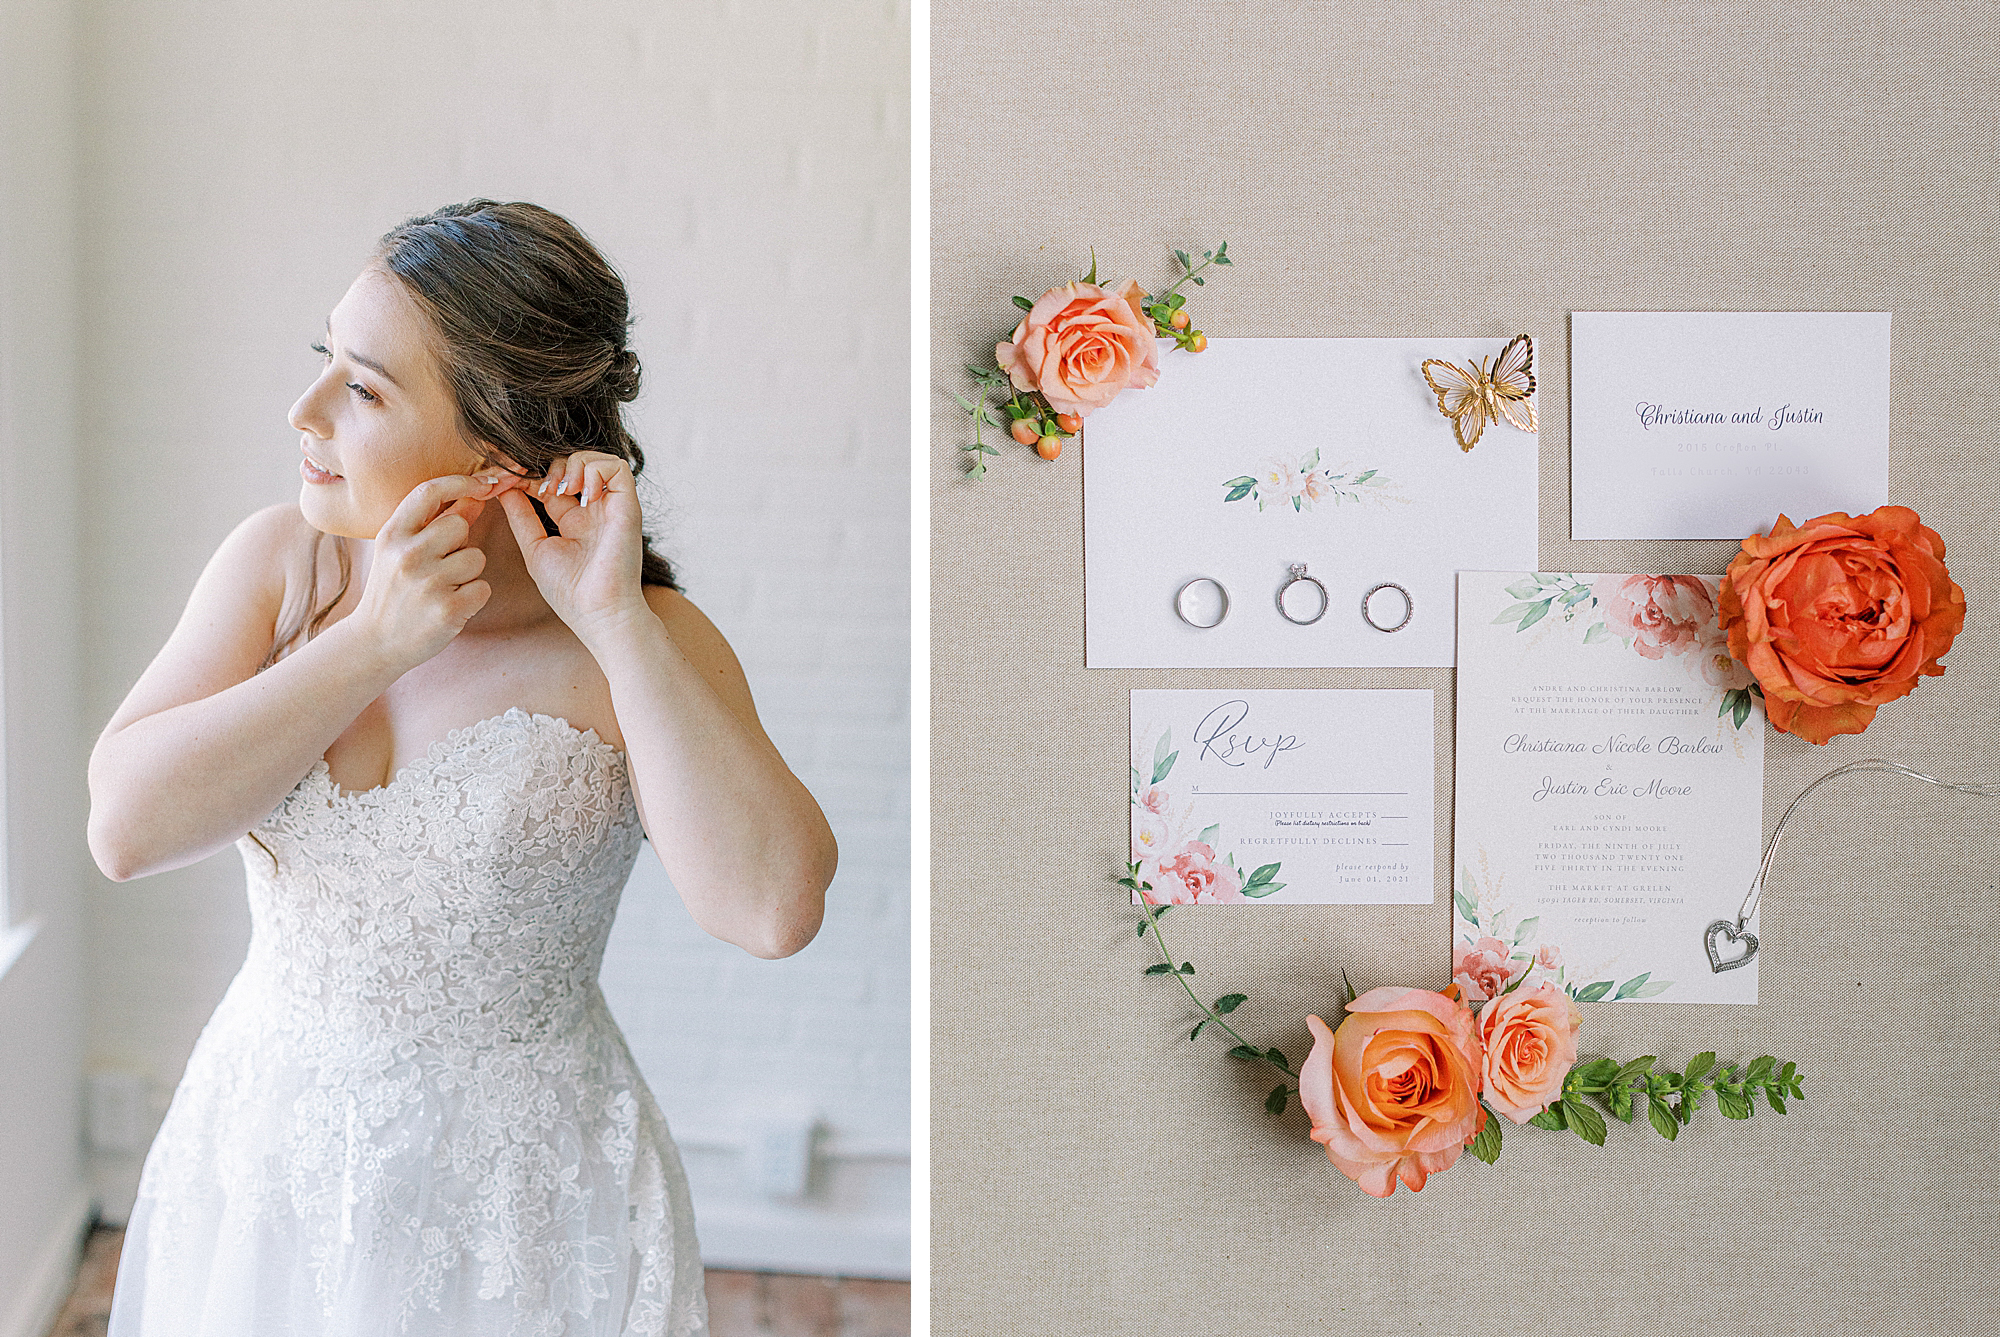 Bride putting in earrings. Flatlay of invitation suite by Ashley Eagleson Photography.